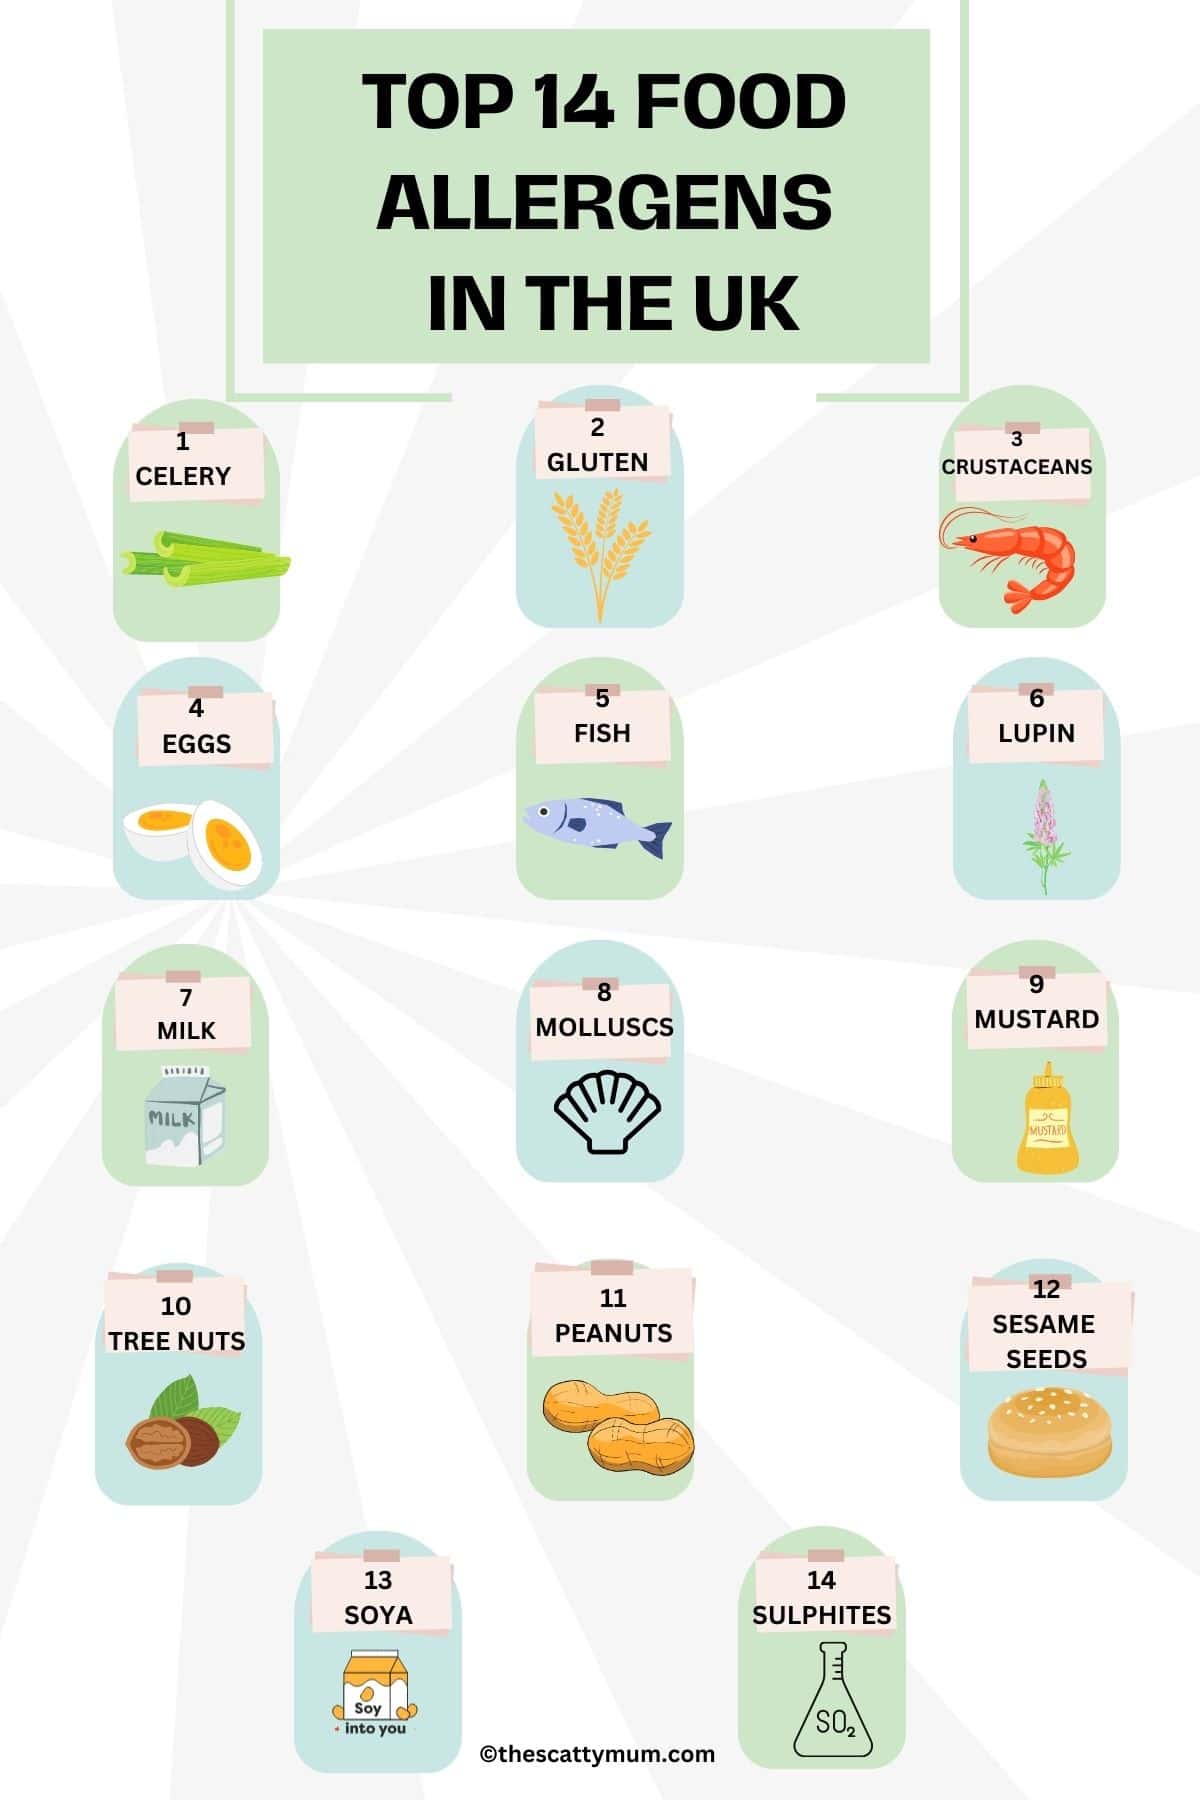 Infographic showing the top 14 food allergens in the UK.